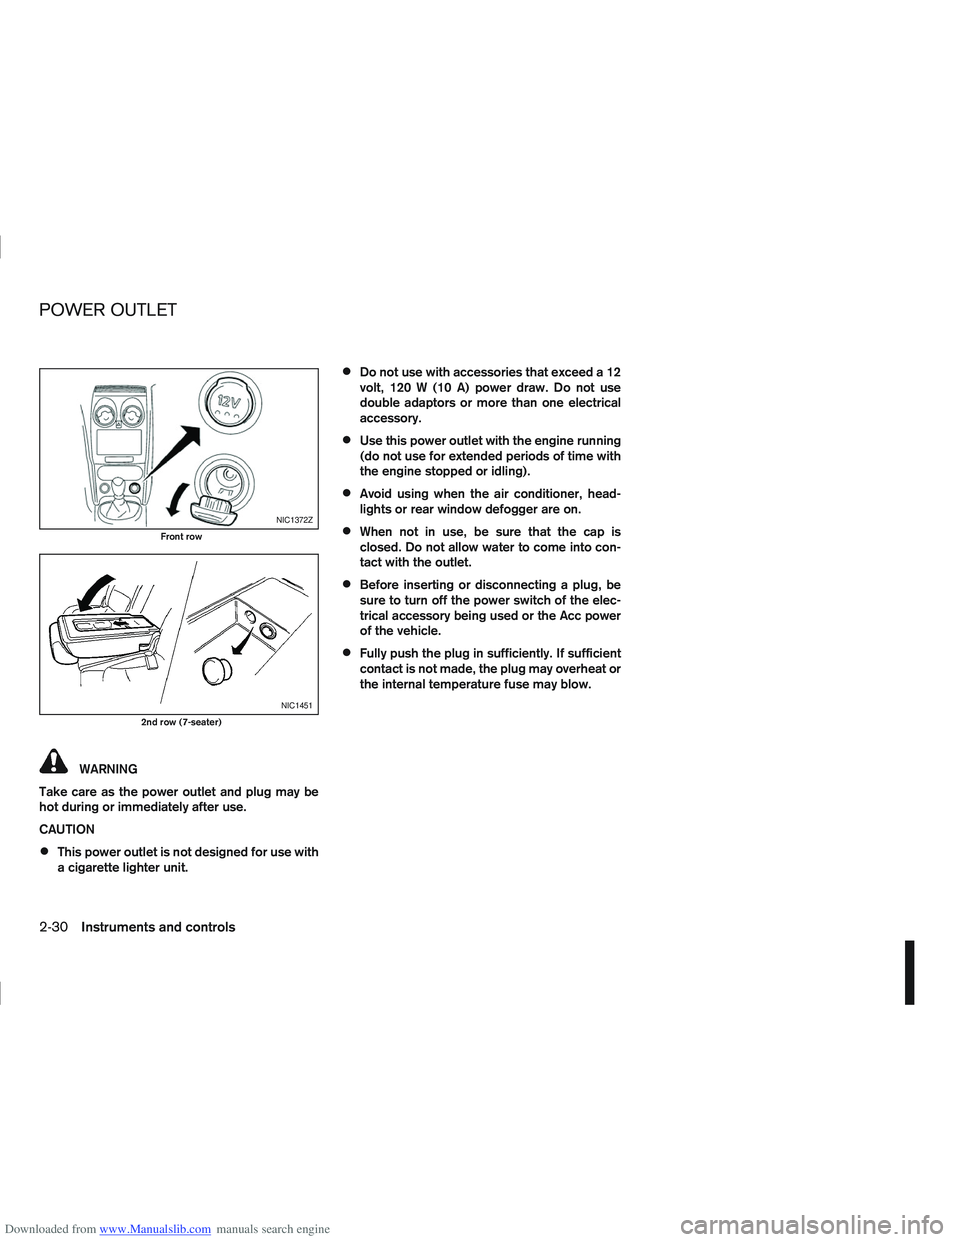 NISSAN QASHQAI 2012  Owners Manual Downloaded from www.Manualslib.com manuals search engine WARNING
Take care as the power outlet and plug may be
hot during or immediately after use.
CAUTION
This power outlet is not designed for use wi